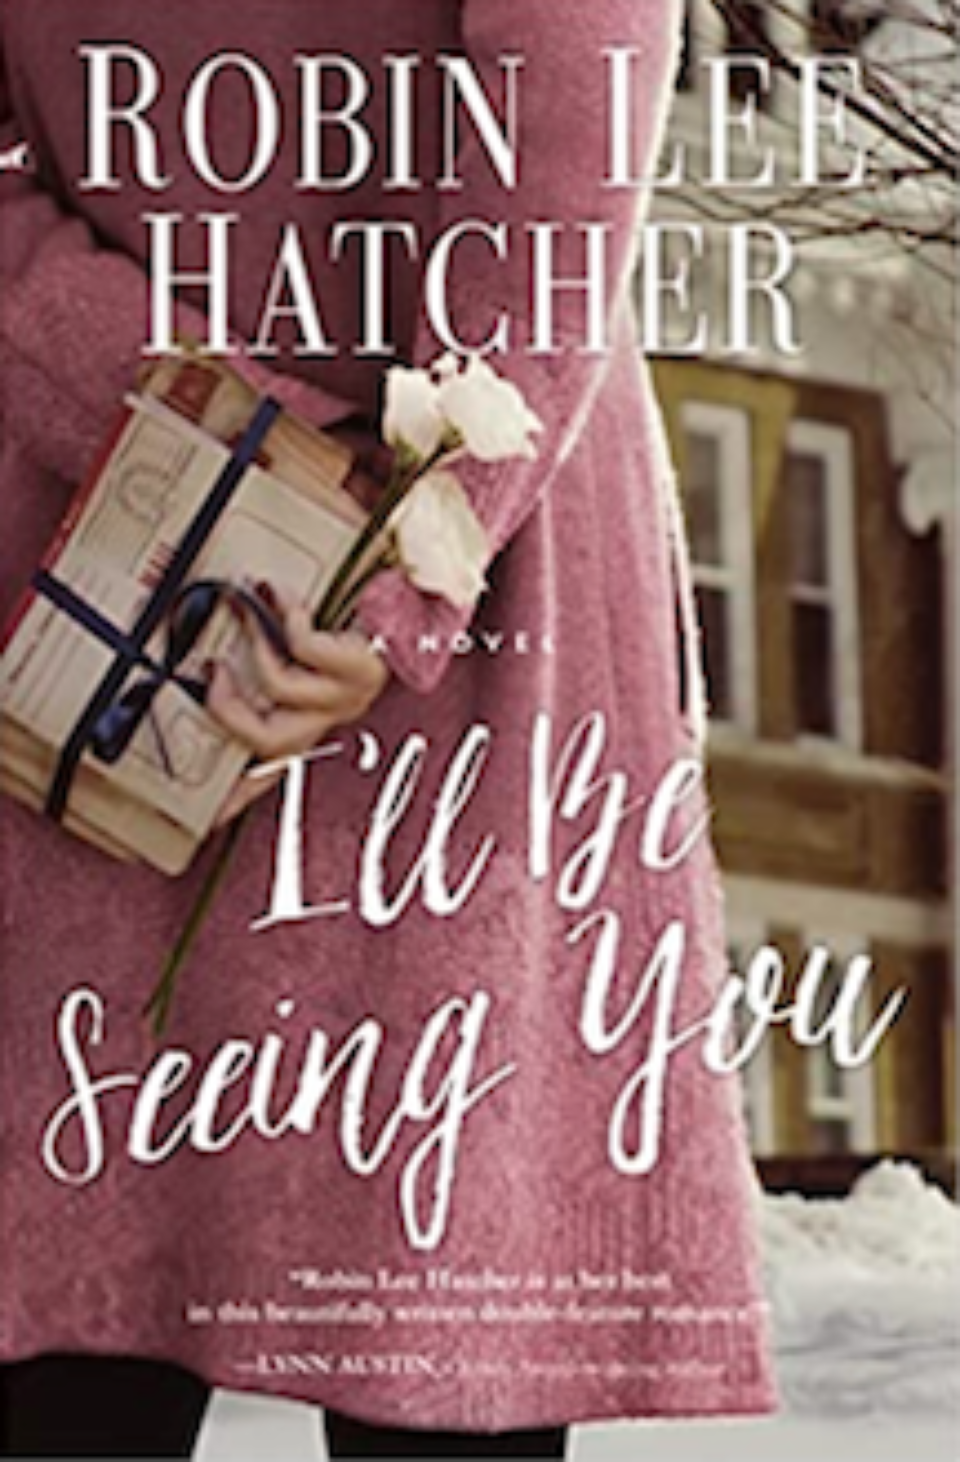 Congrats to Kay Garrett who won Robin Lee Hatcher's book I'll Be Seeing You!